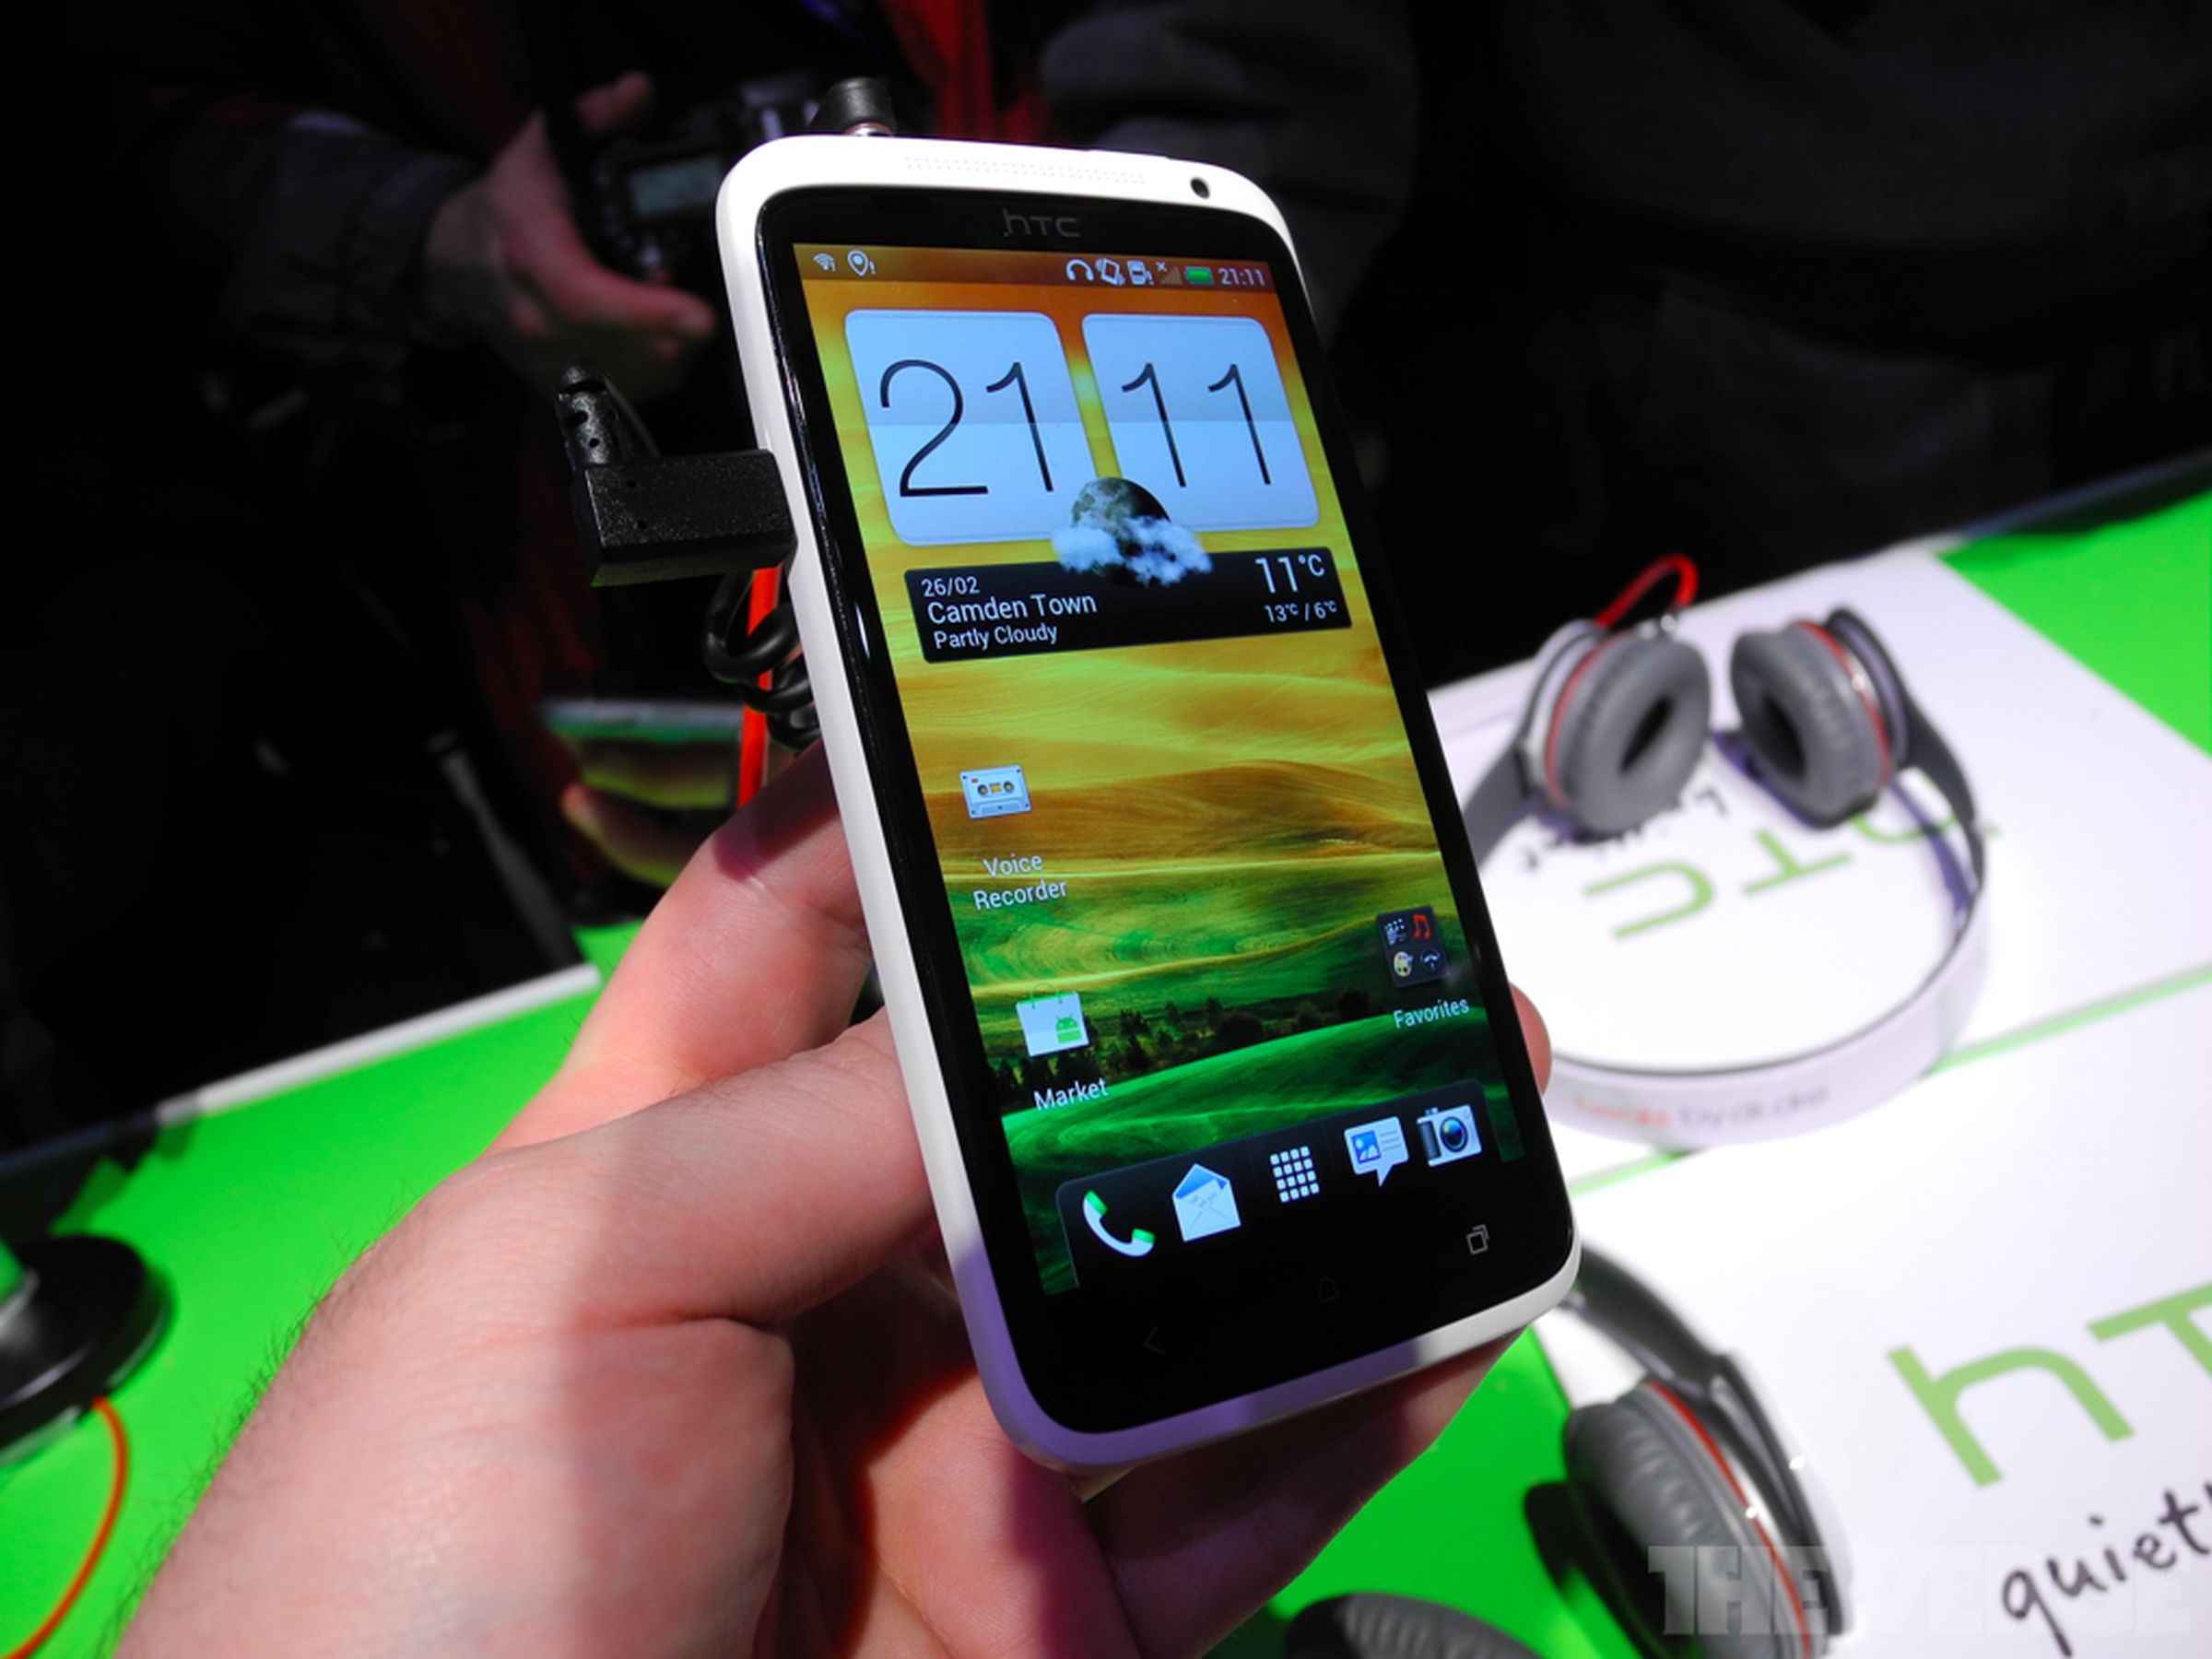 HTC One X hands-on photos